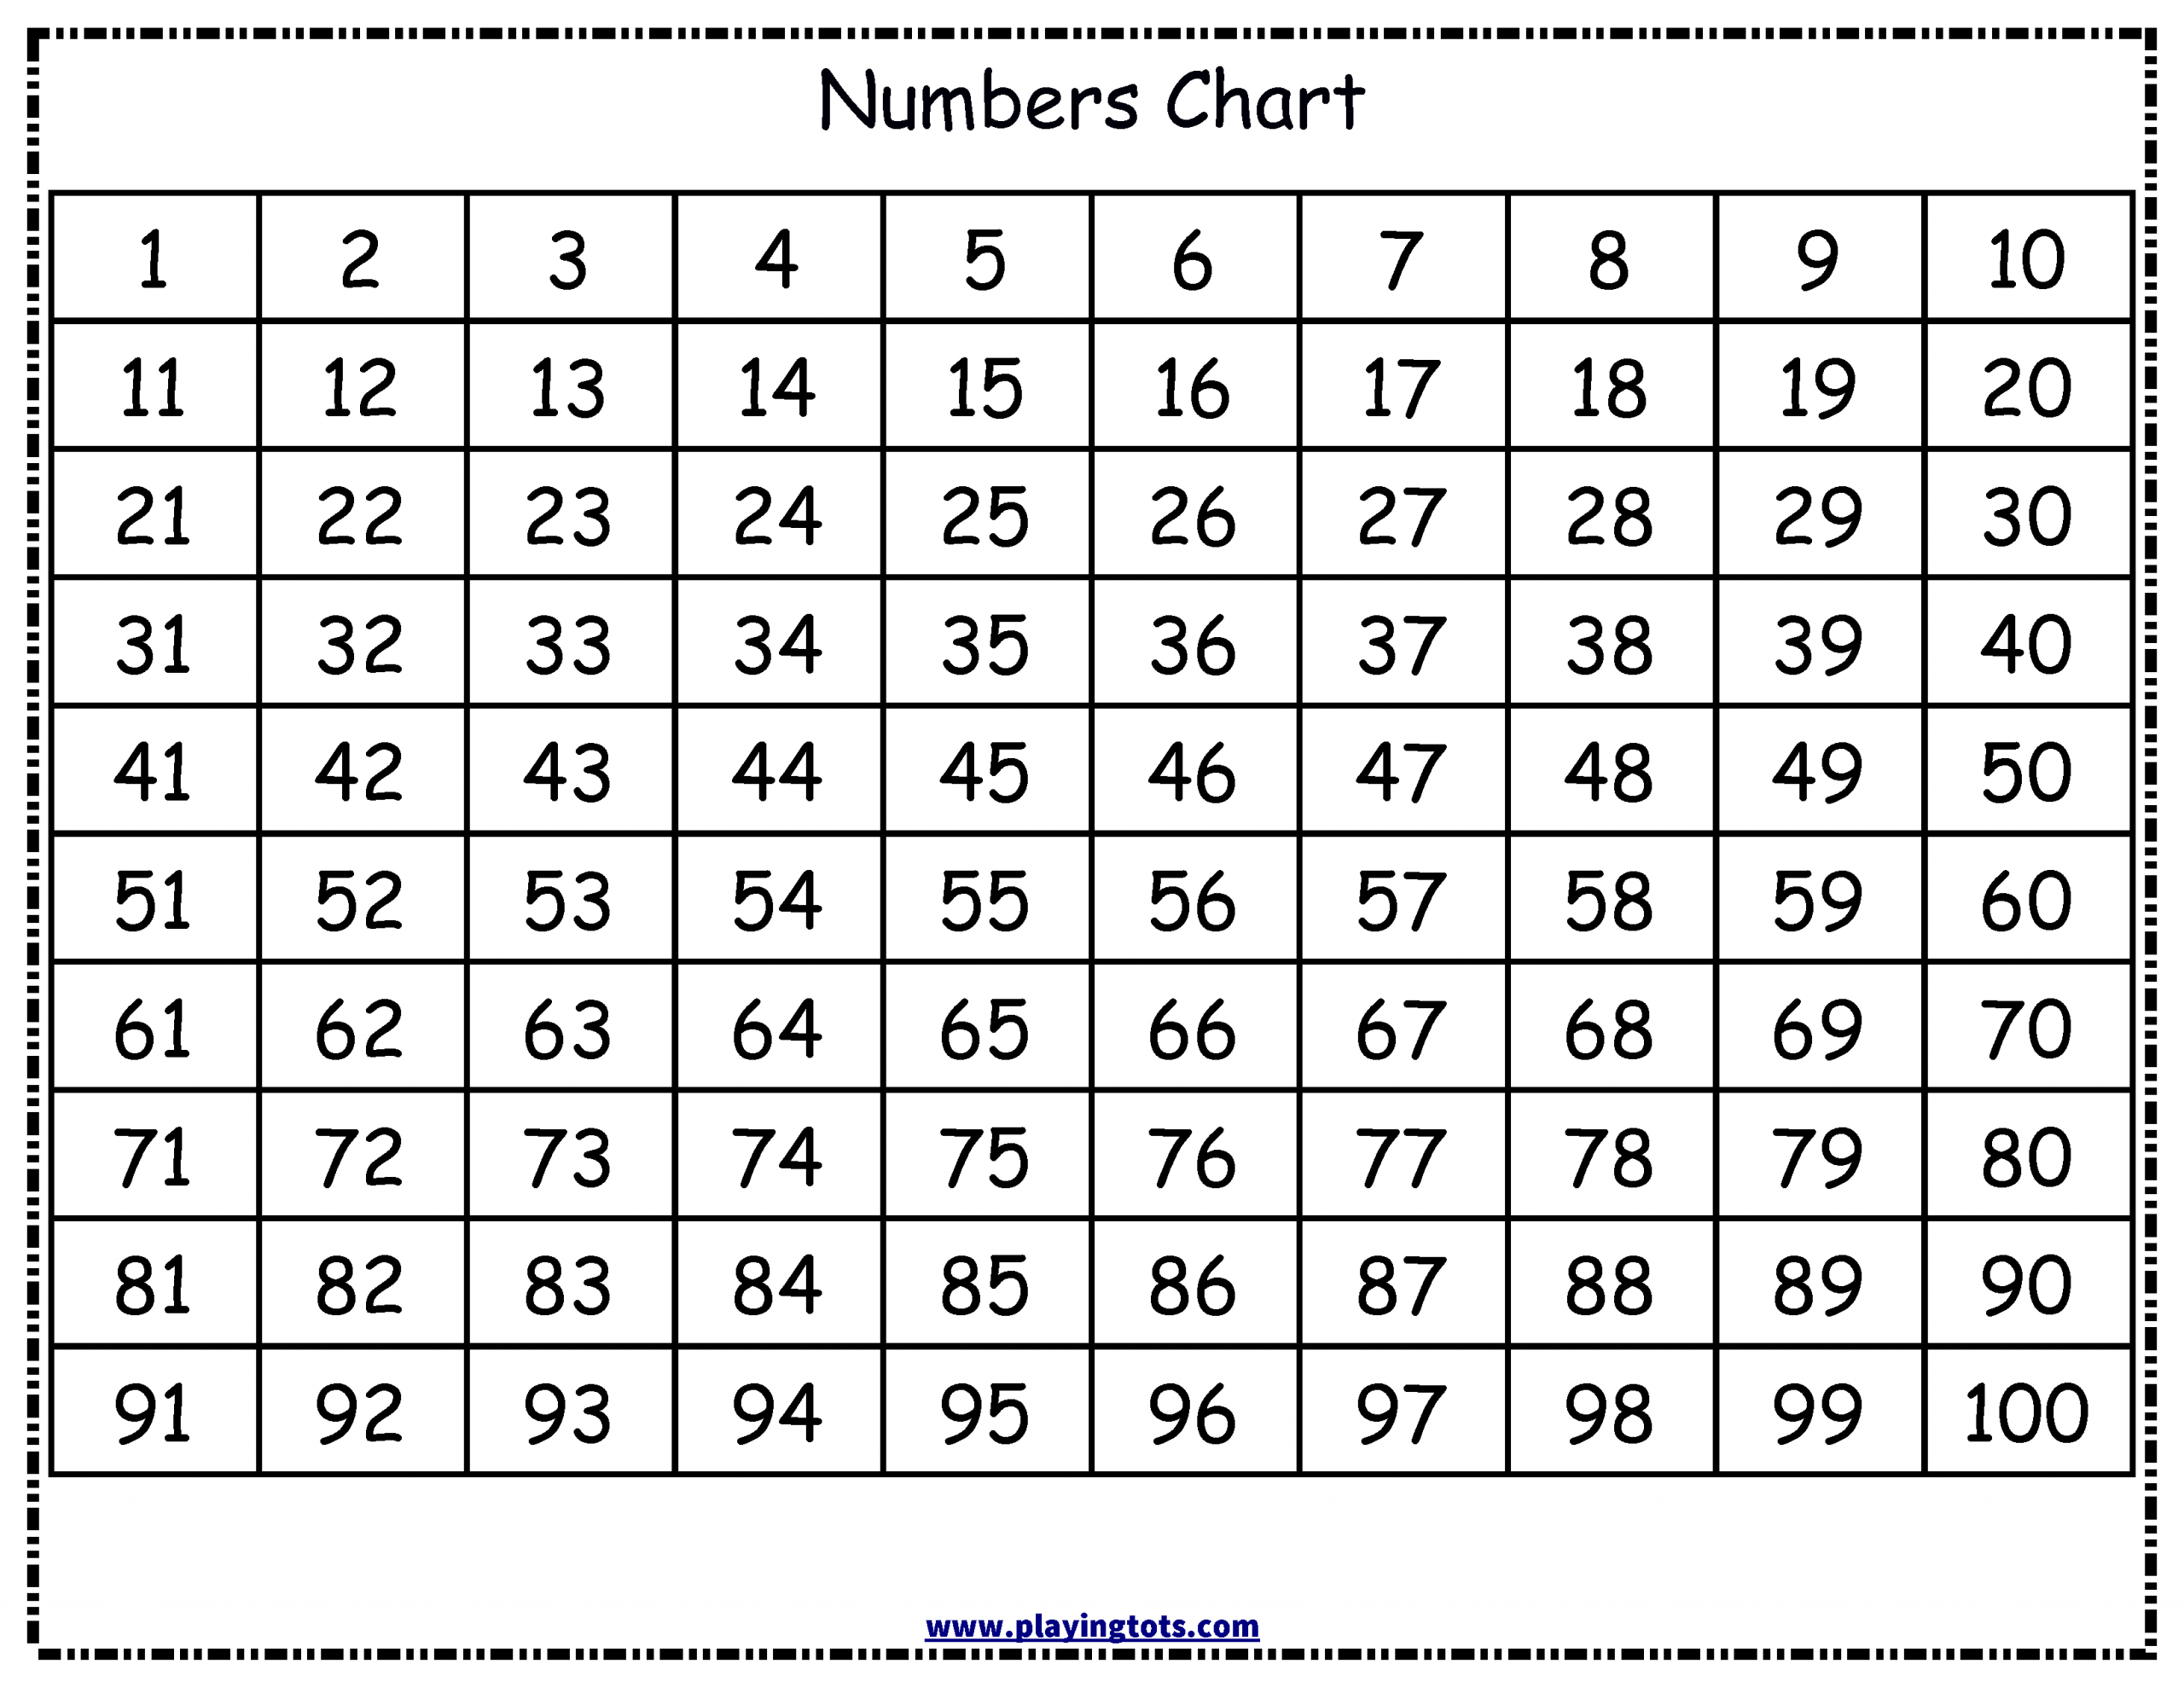 Numbers 1-100 Printable That Are Astounding | Kim Website